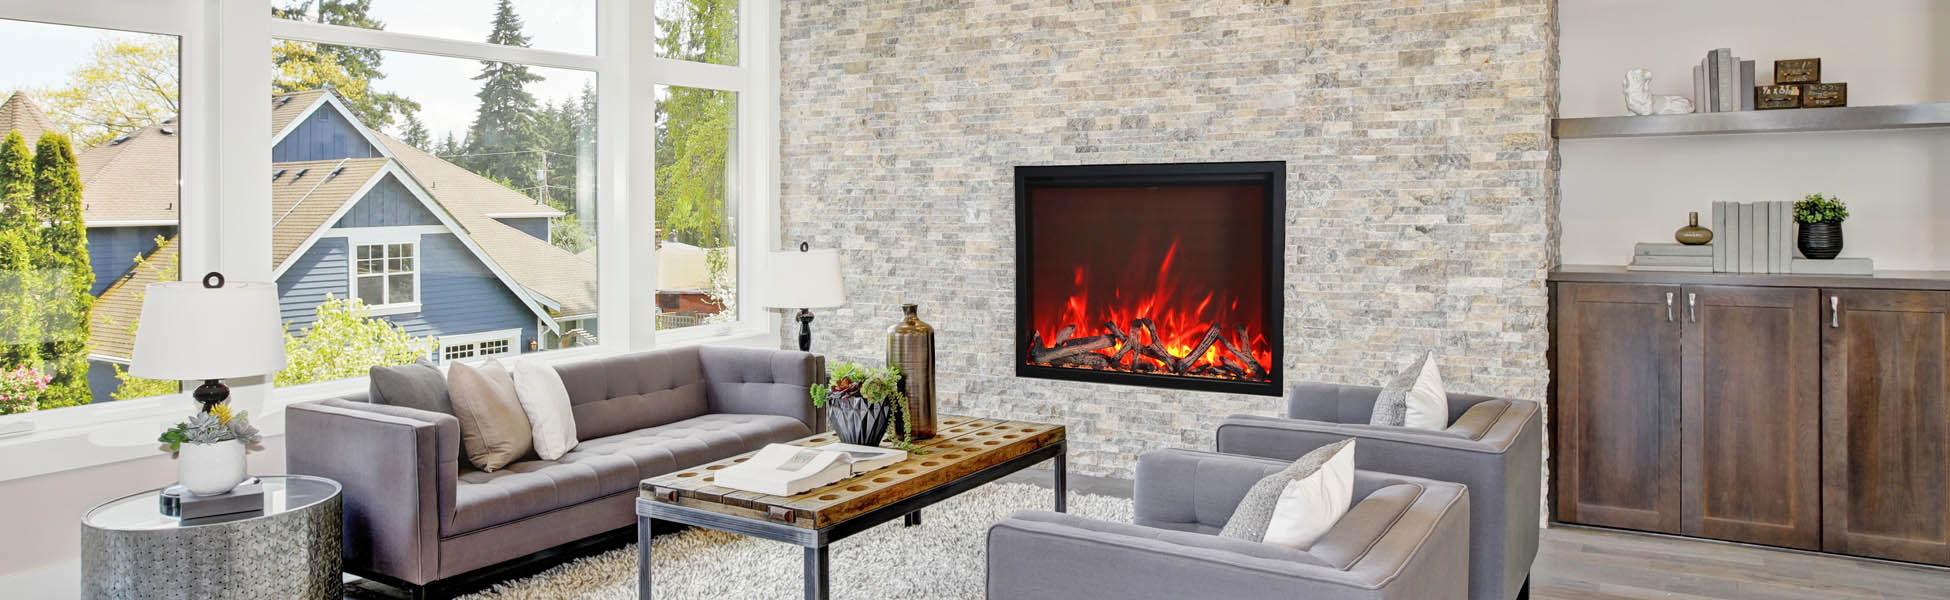 TRD-48 ELECTRIC FIREPLACE